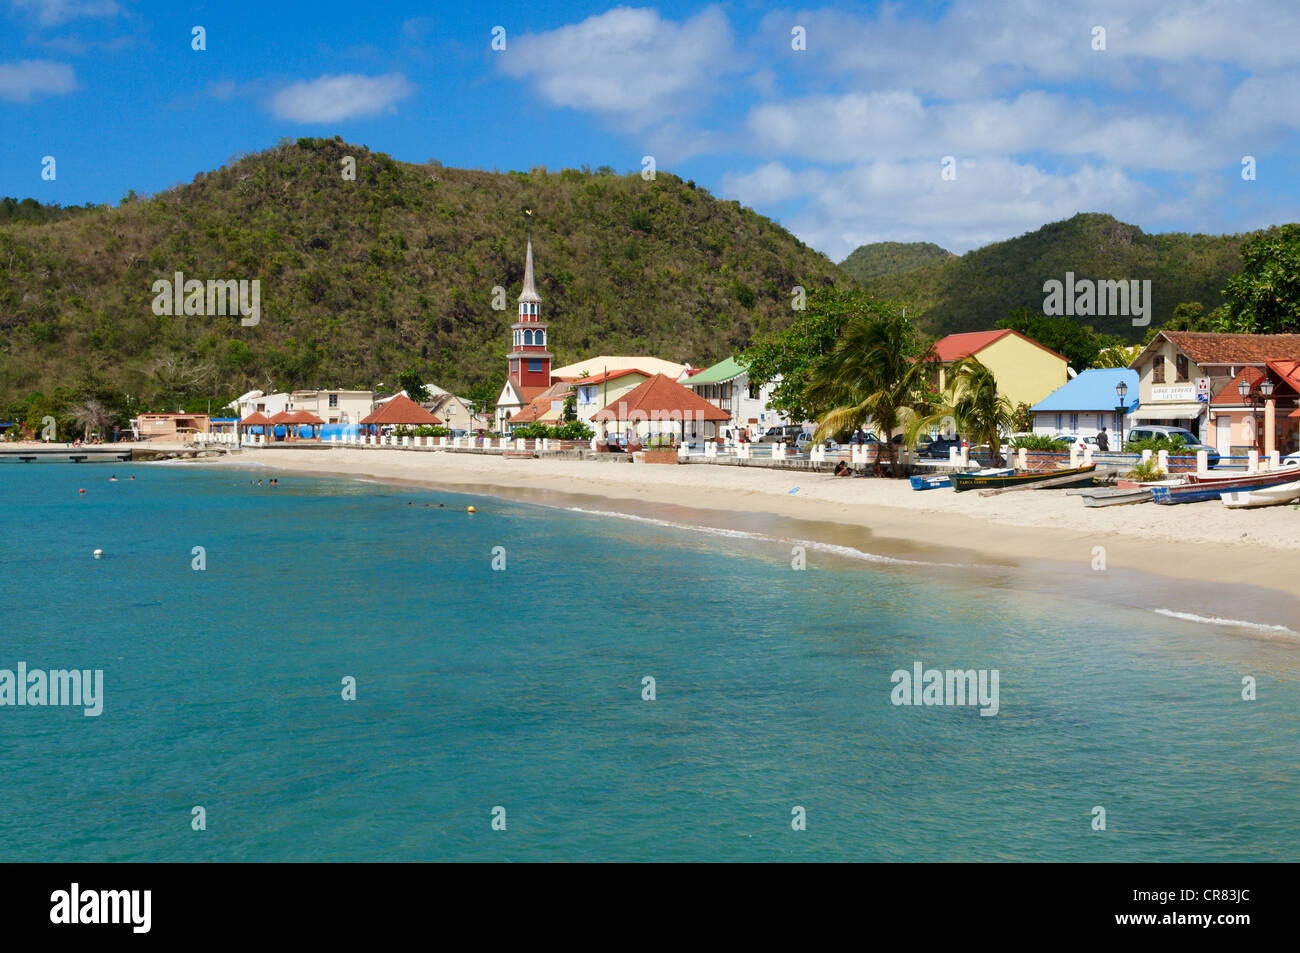 France, Martinique (French West Indies), Les Anses d'Arlet, Grande Anse city, Beach Stock Photo